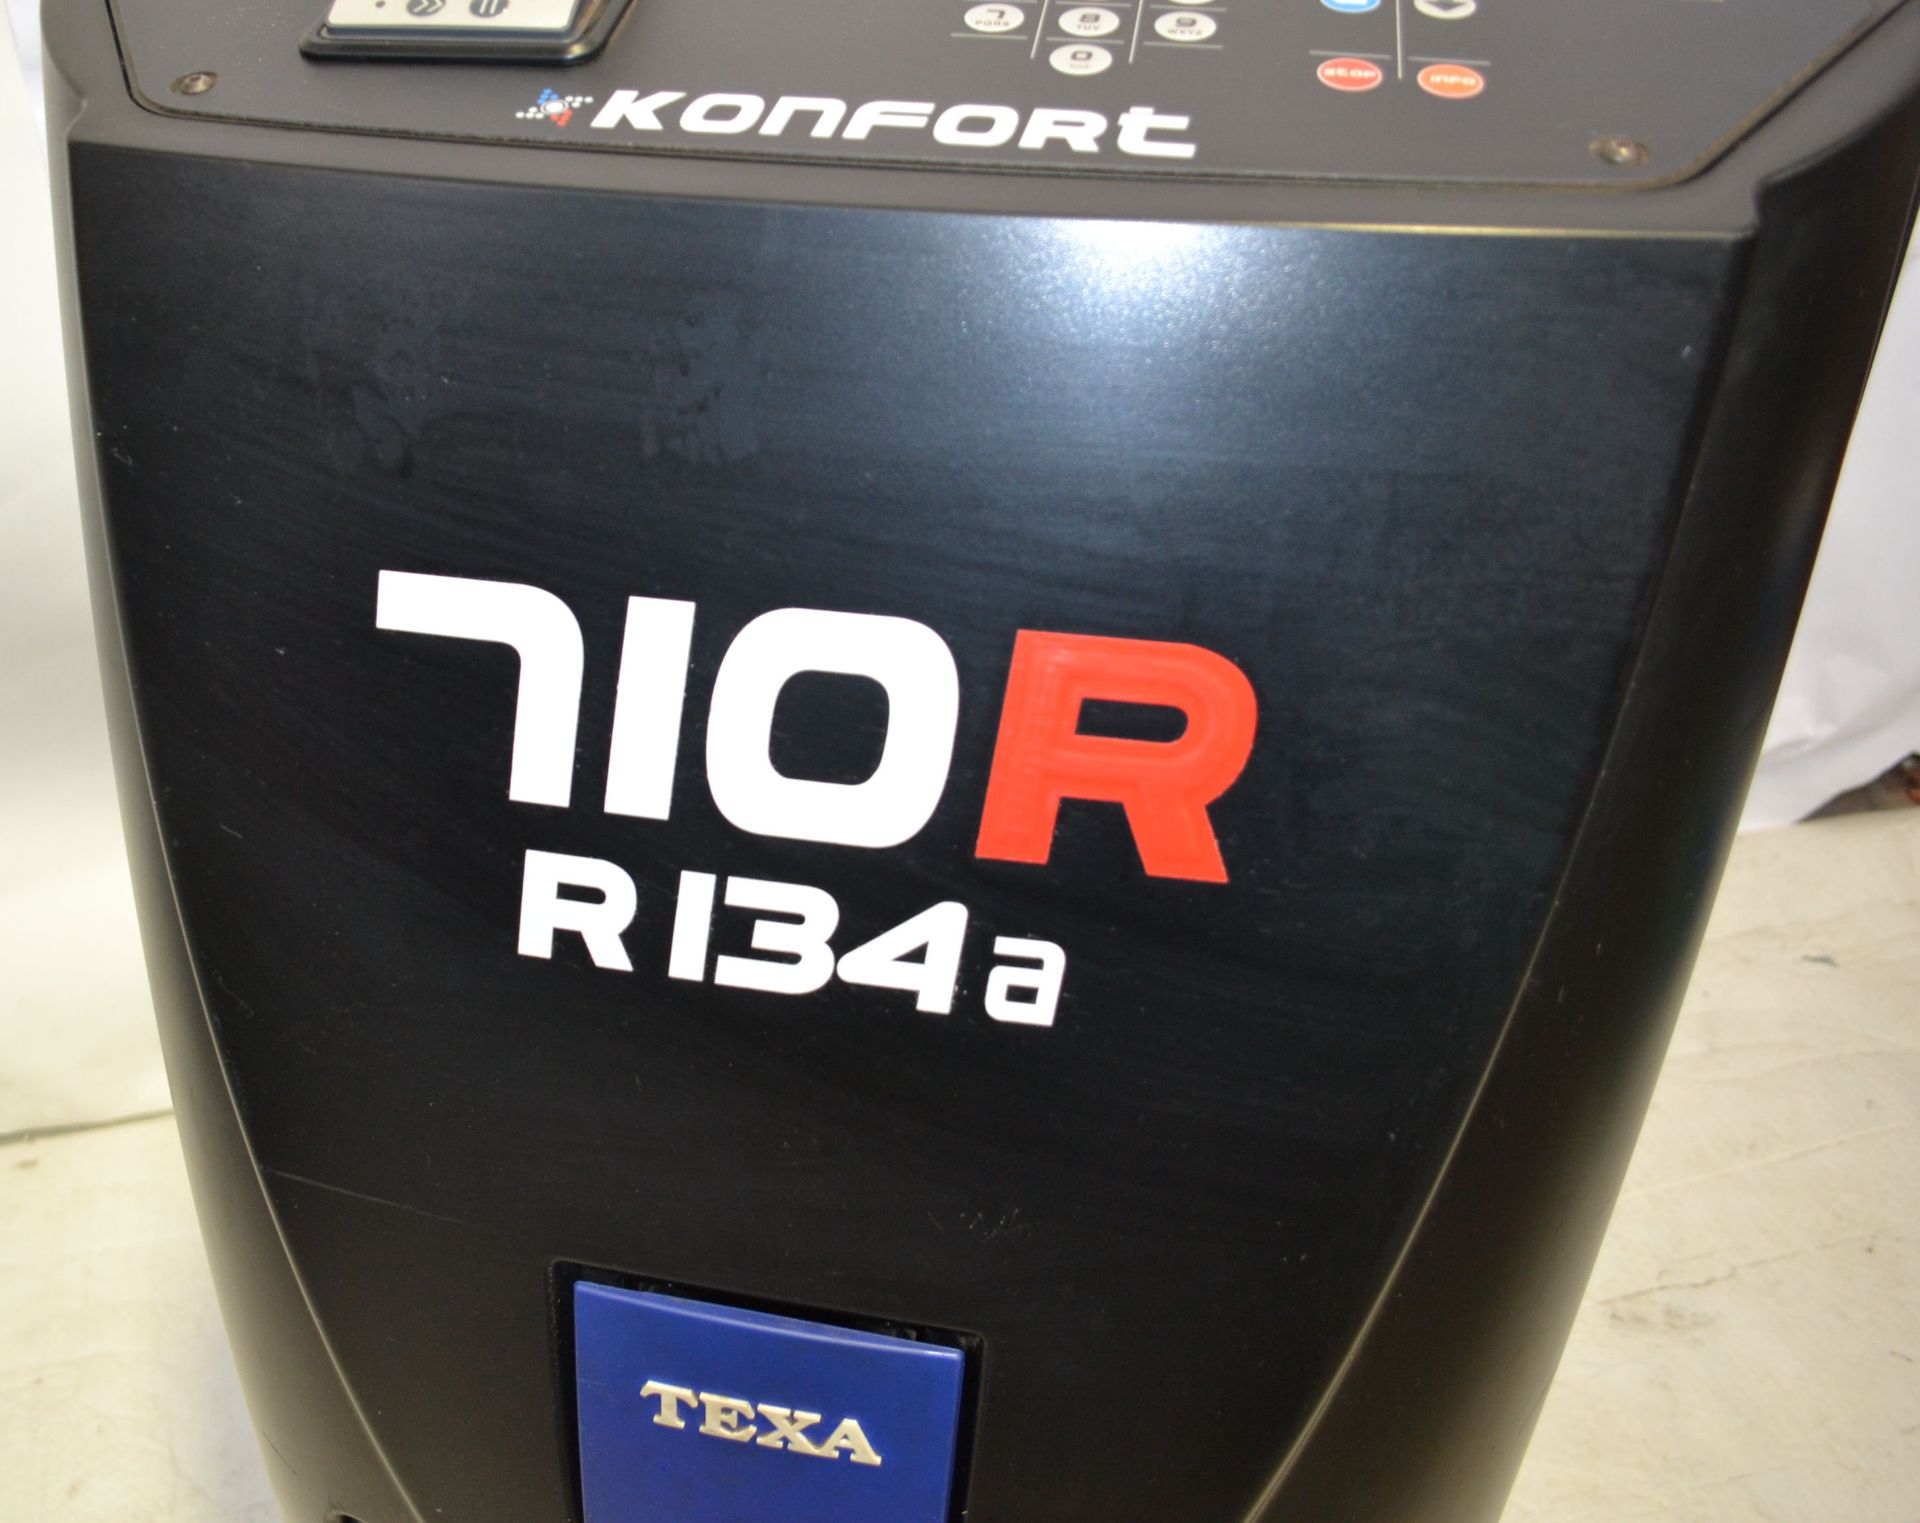 1 x Texa Konfort 710R Air Con AC Servicing Machine for R134a - Excellent Condition - Year of - Image 7 of 24